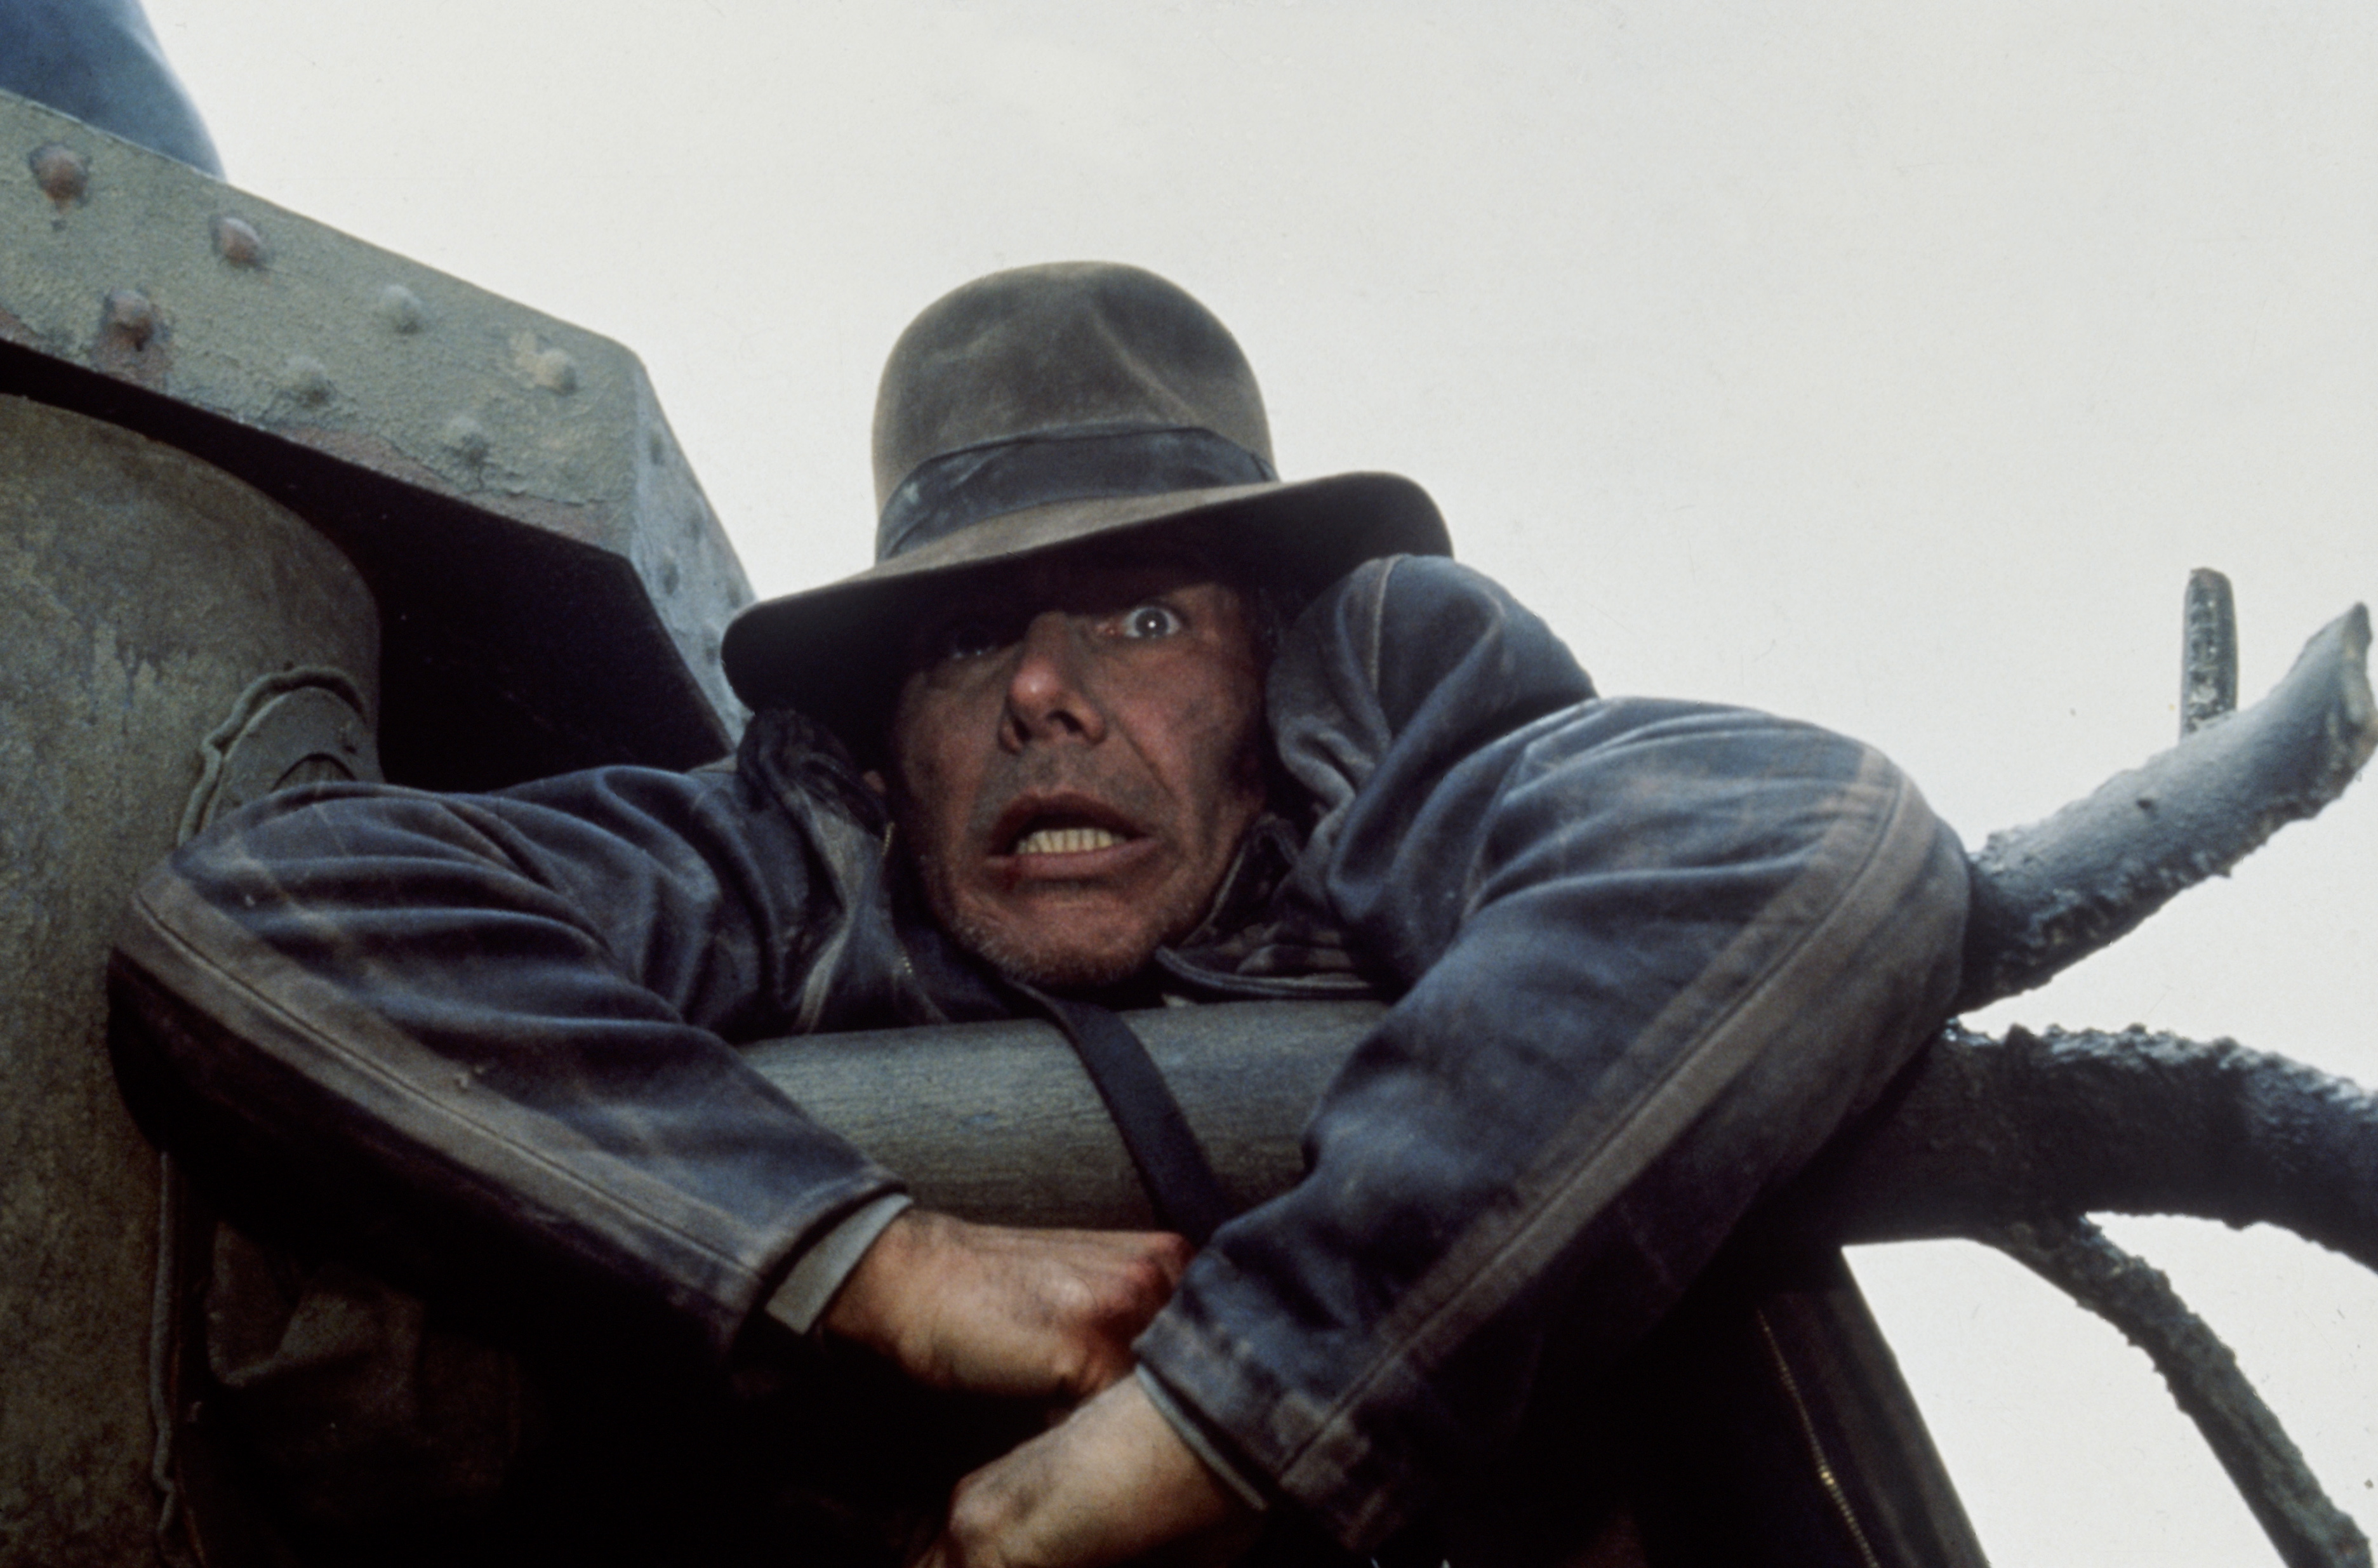 Harrison Ford in a scene from the film “Indiana Jones and the Last Crusade” in 1989 | Source: Getty Images